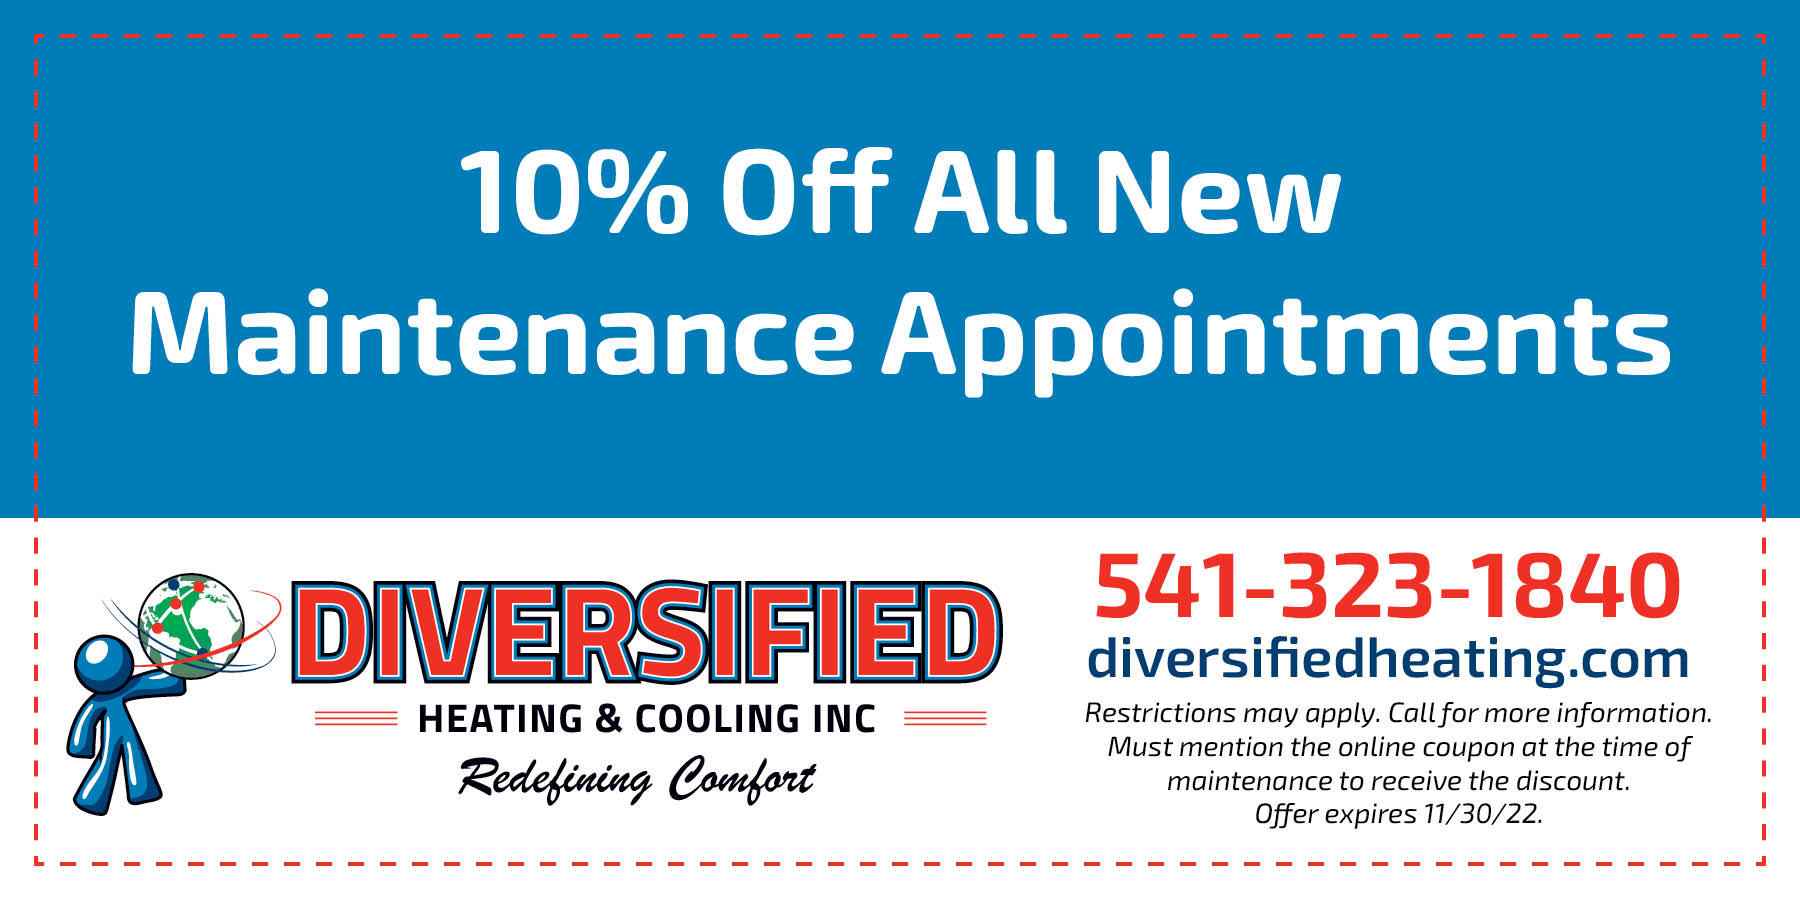 10% off all new maintenance appointments